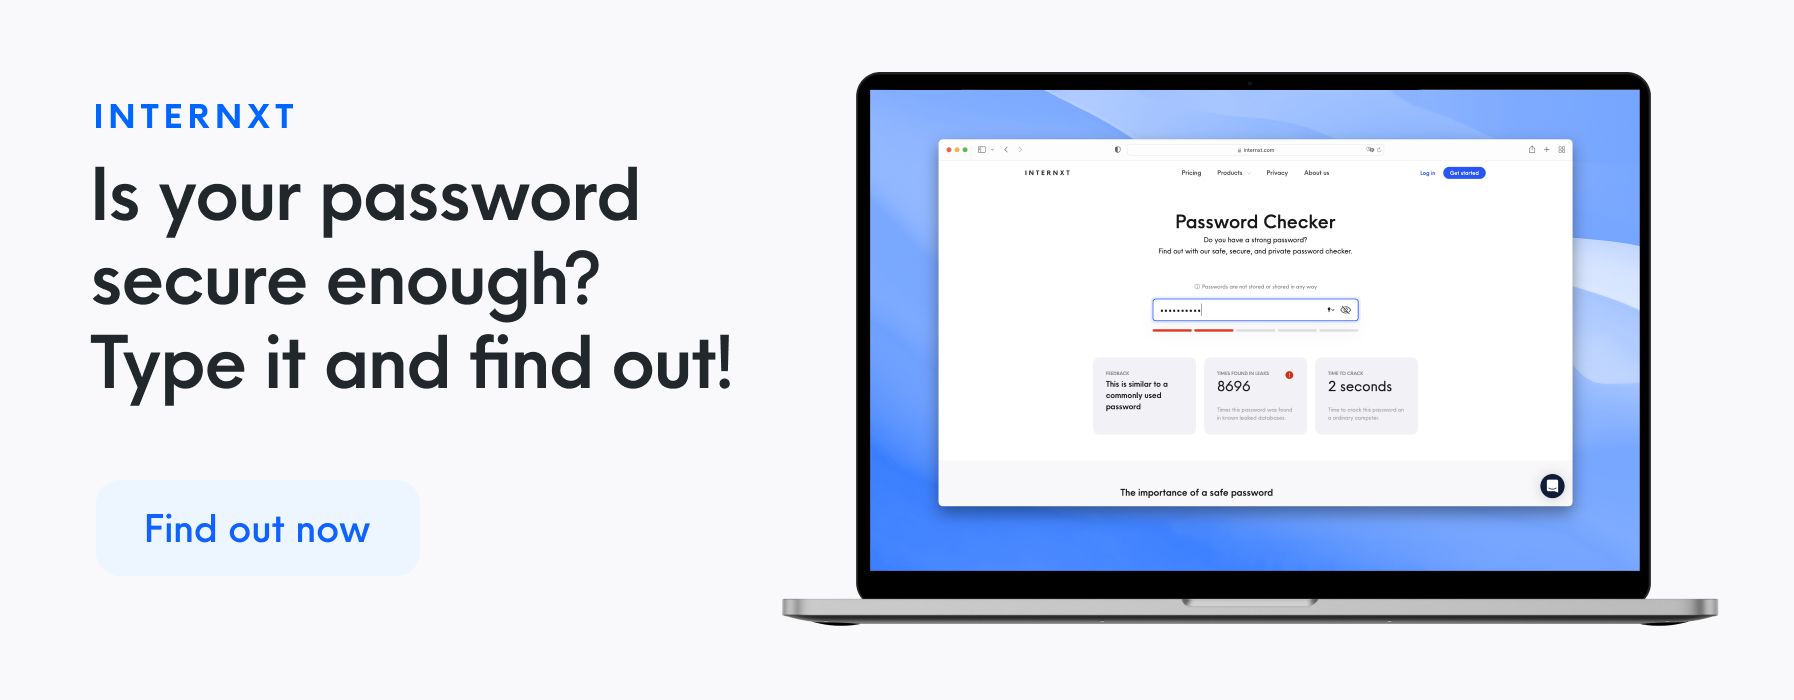 Internxt Password Checker is a secure way to proof your security